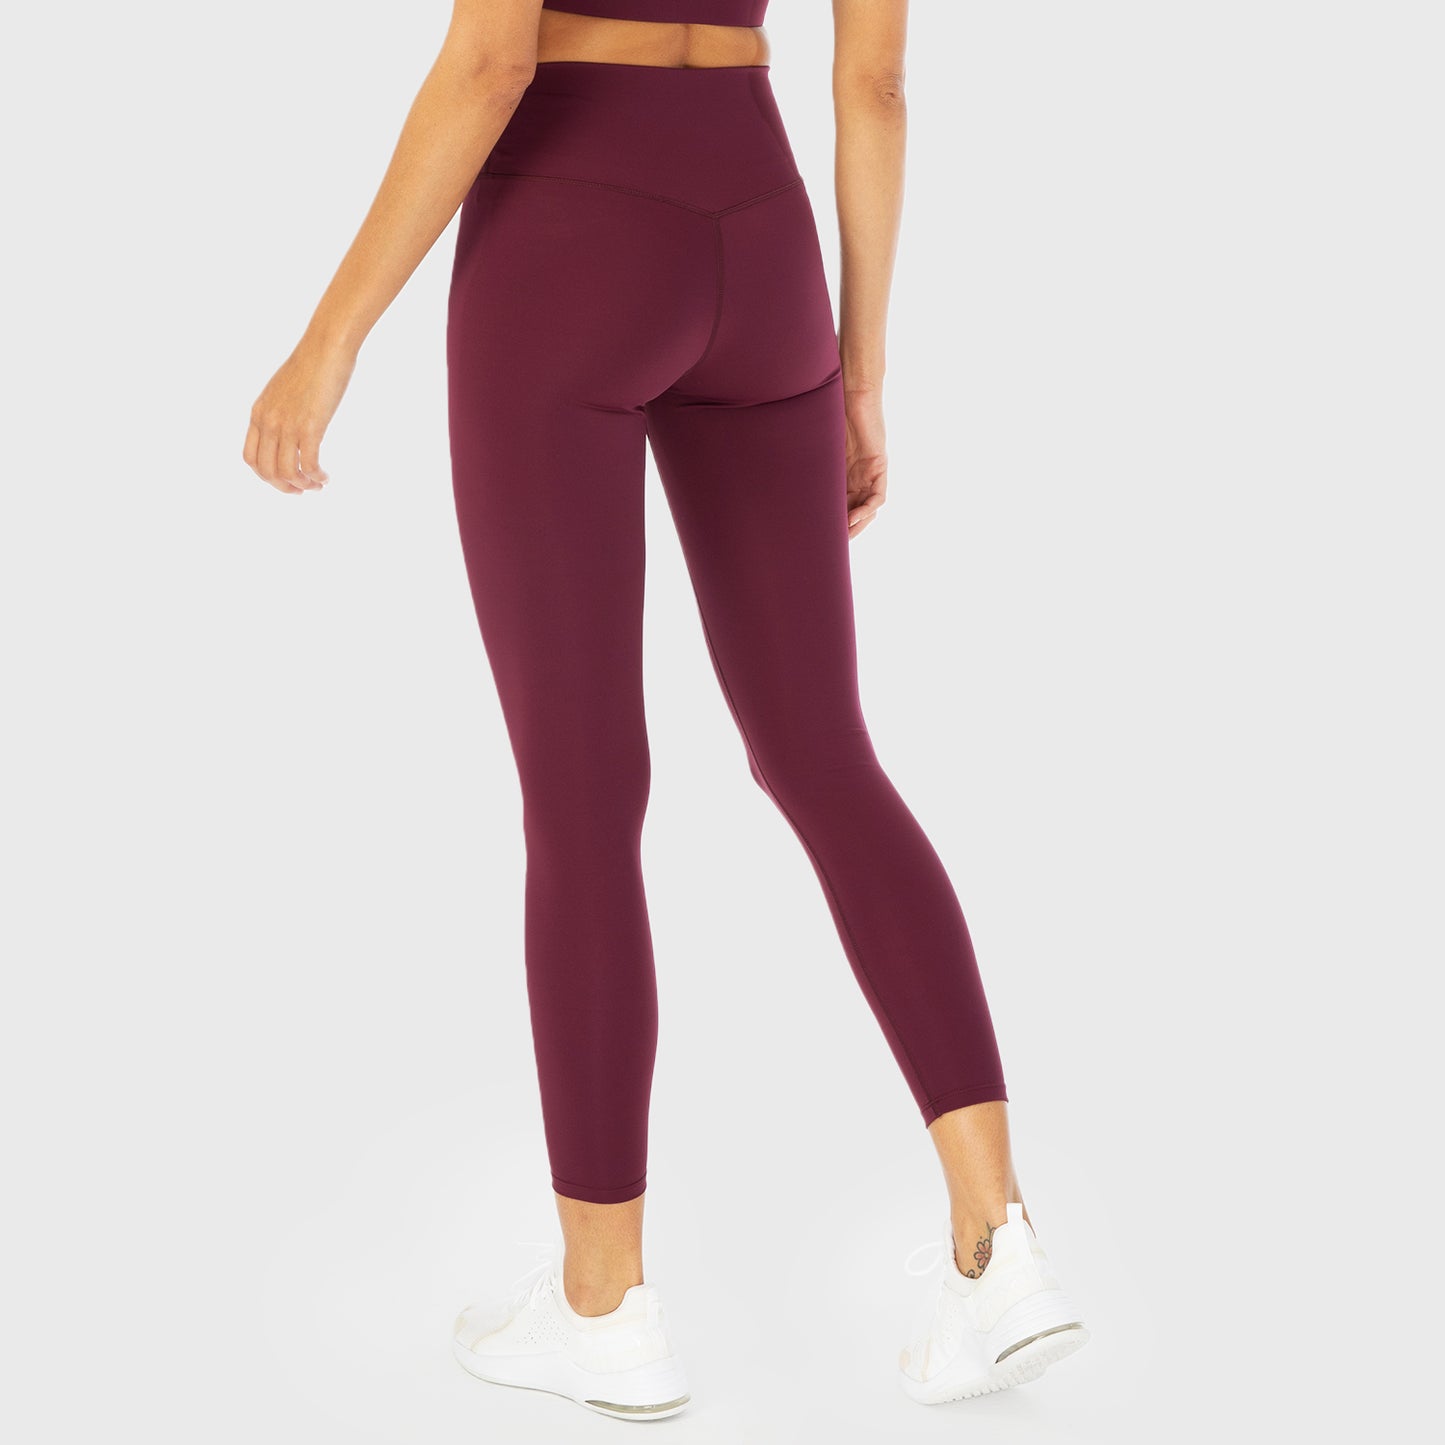 squatwolf-workout-clothes-infinity-cropped-7-8-leggings-grape-leggings-for-women